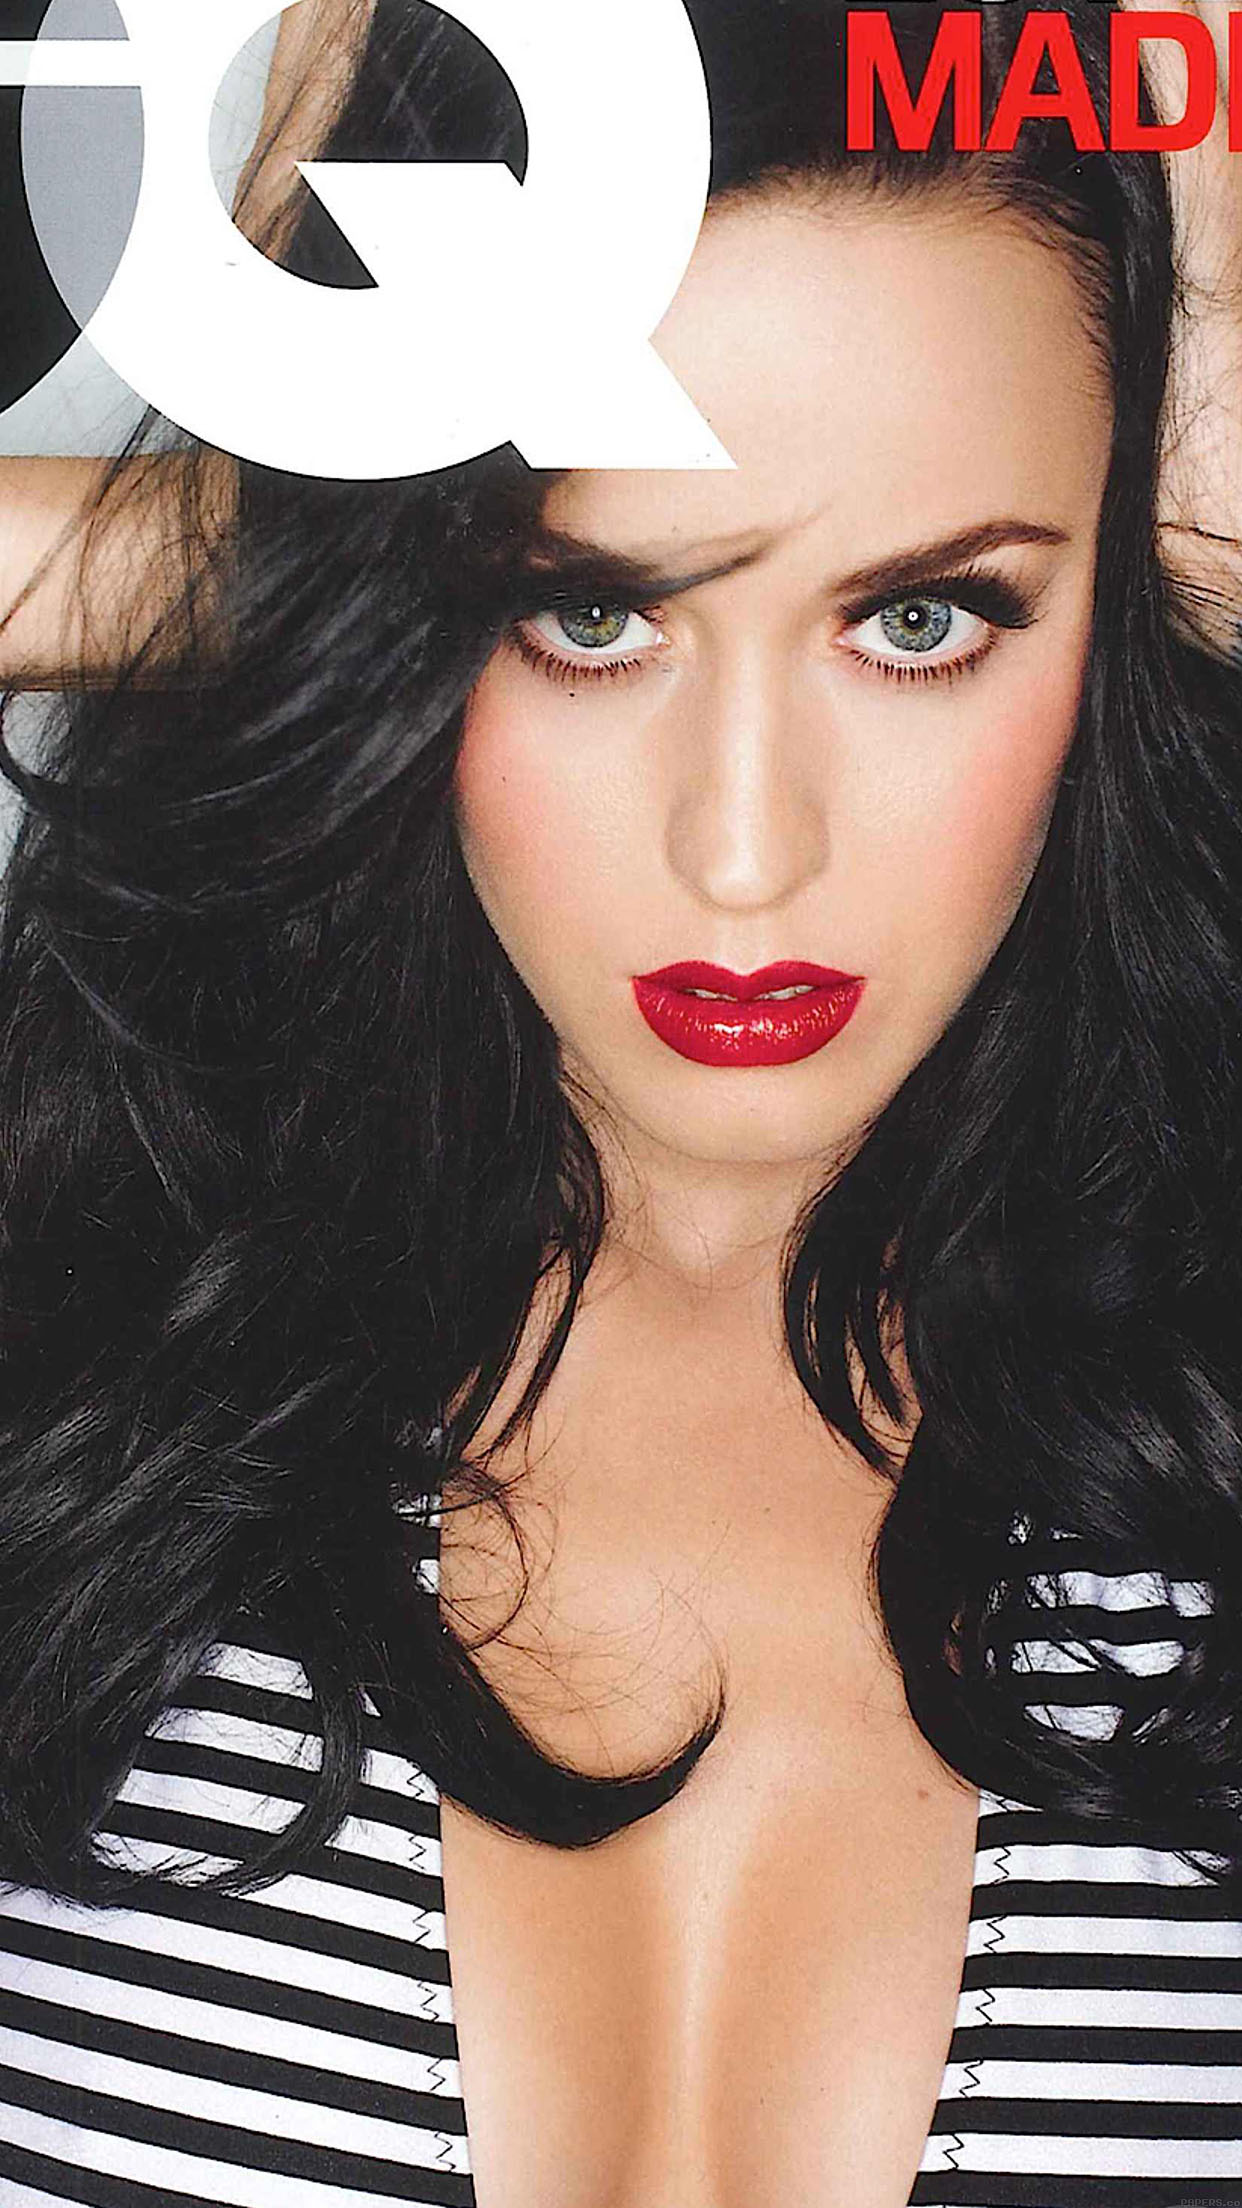 Wallpaper Gq Katy Perry Girl Music Face Android wallpaper